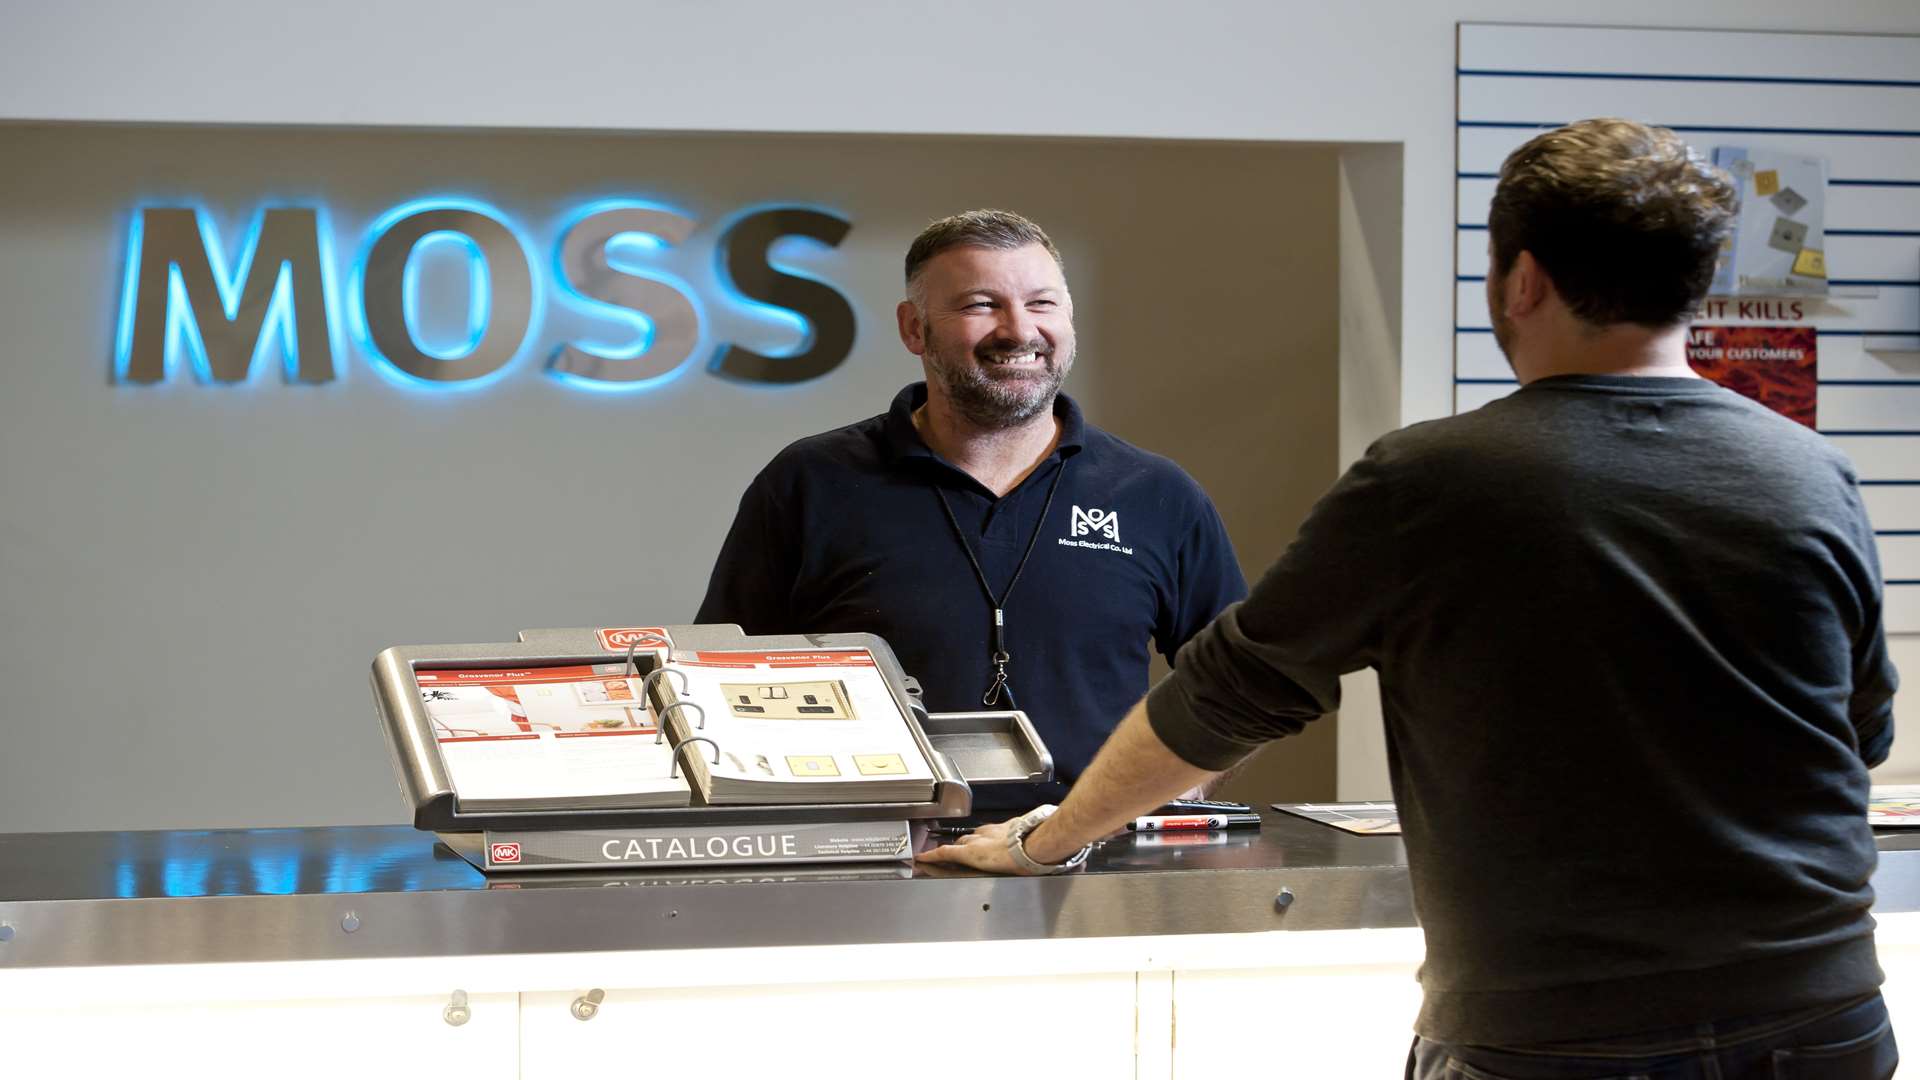 Moss Electrical is based in Dartford